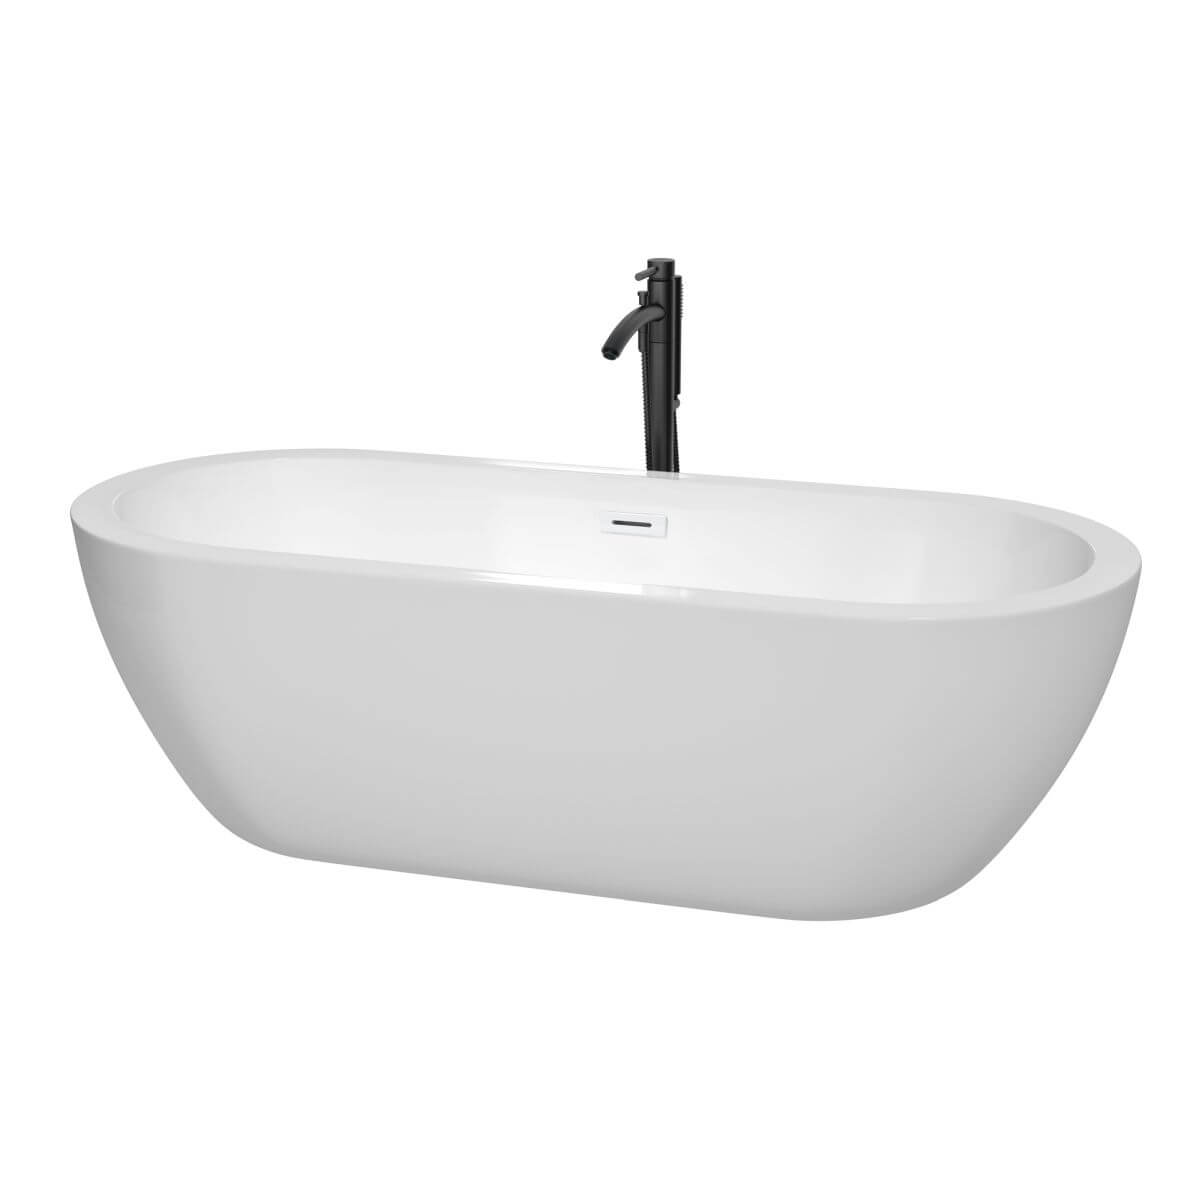 Wyndham Collection Soho 72 inch Freestanding Bathtub in White with Shiny White Trim and Floor Mounted Faucet in Matte Black - WCOBT100272SWATPBK